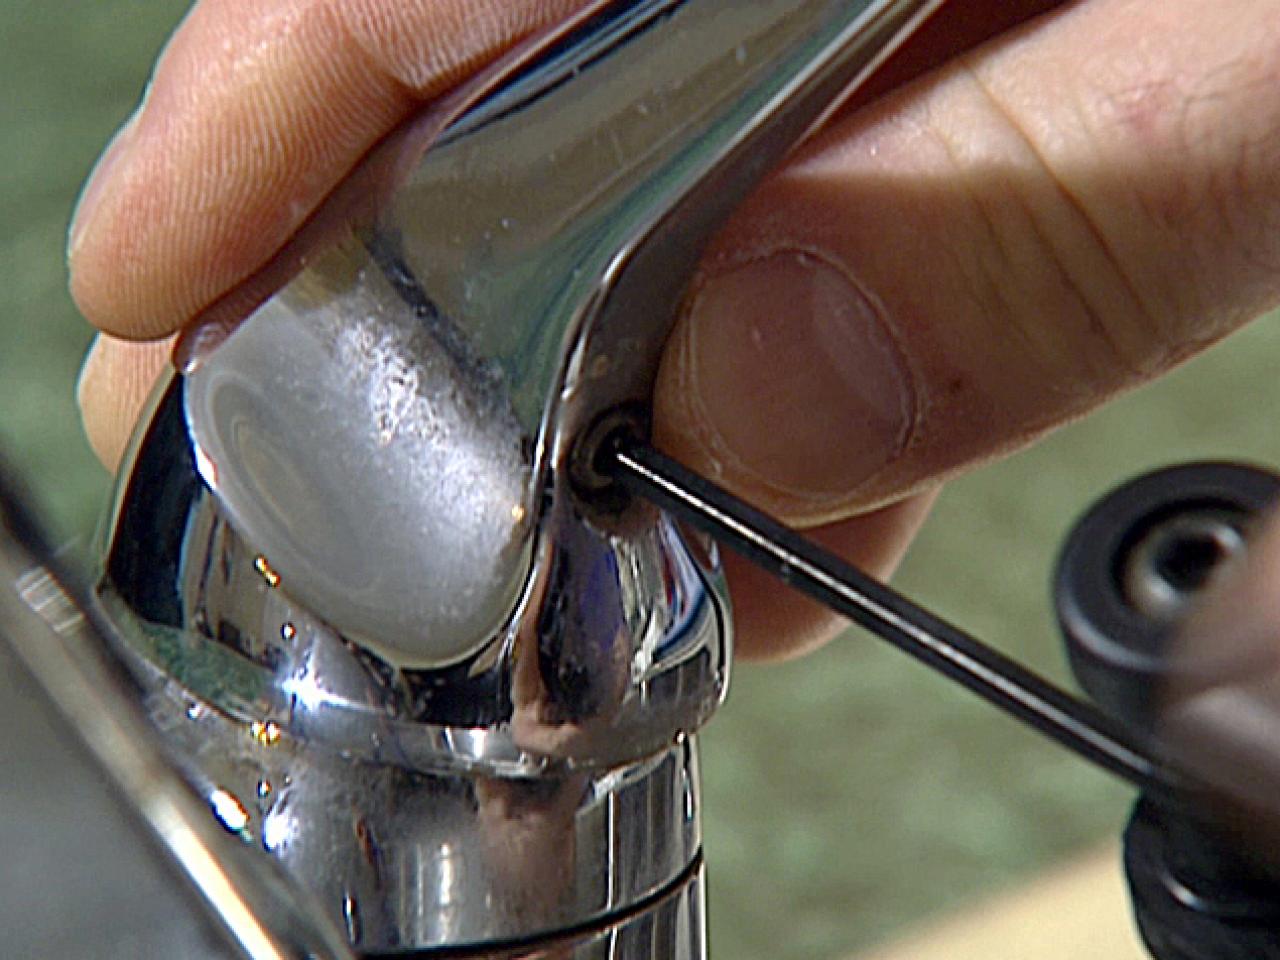 Can you repair Moen faucets yourself?